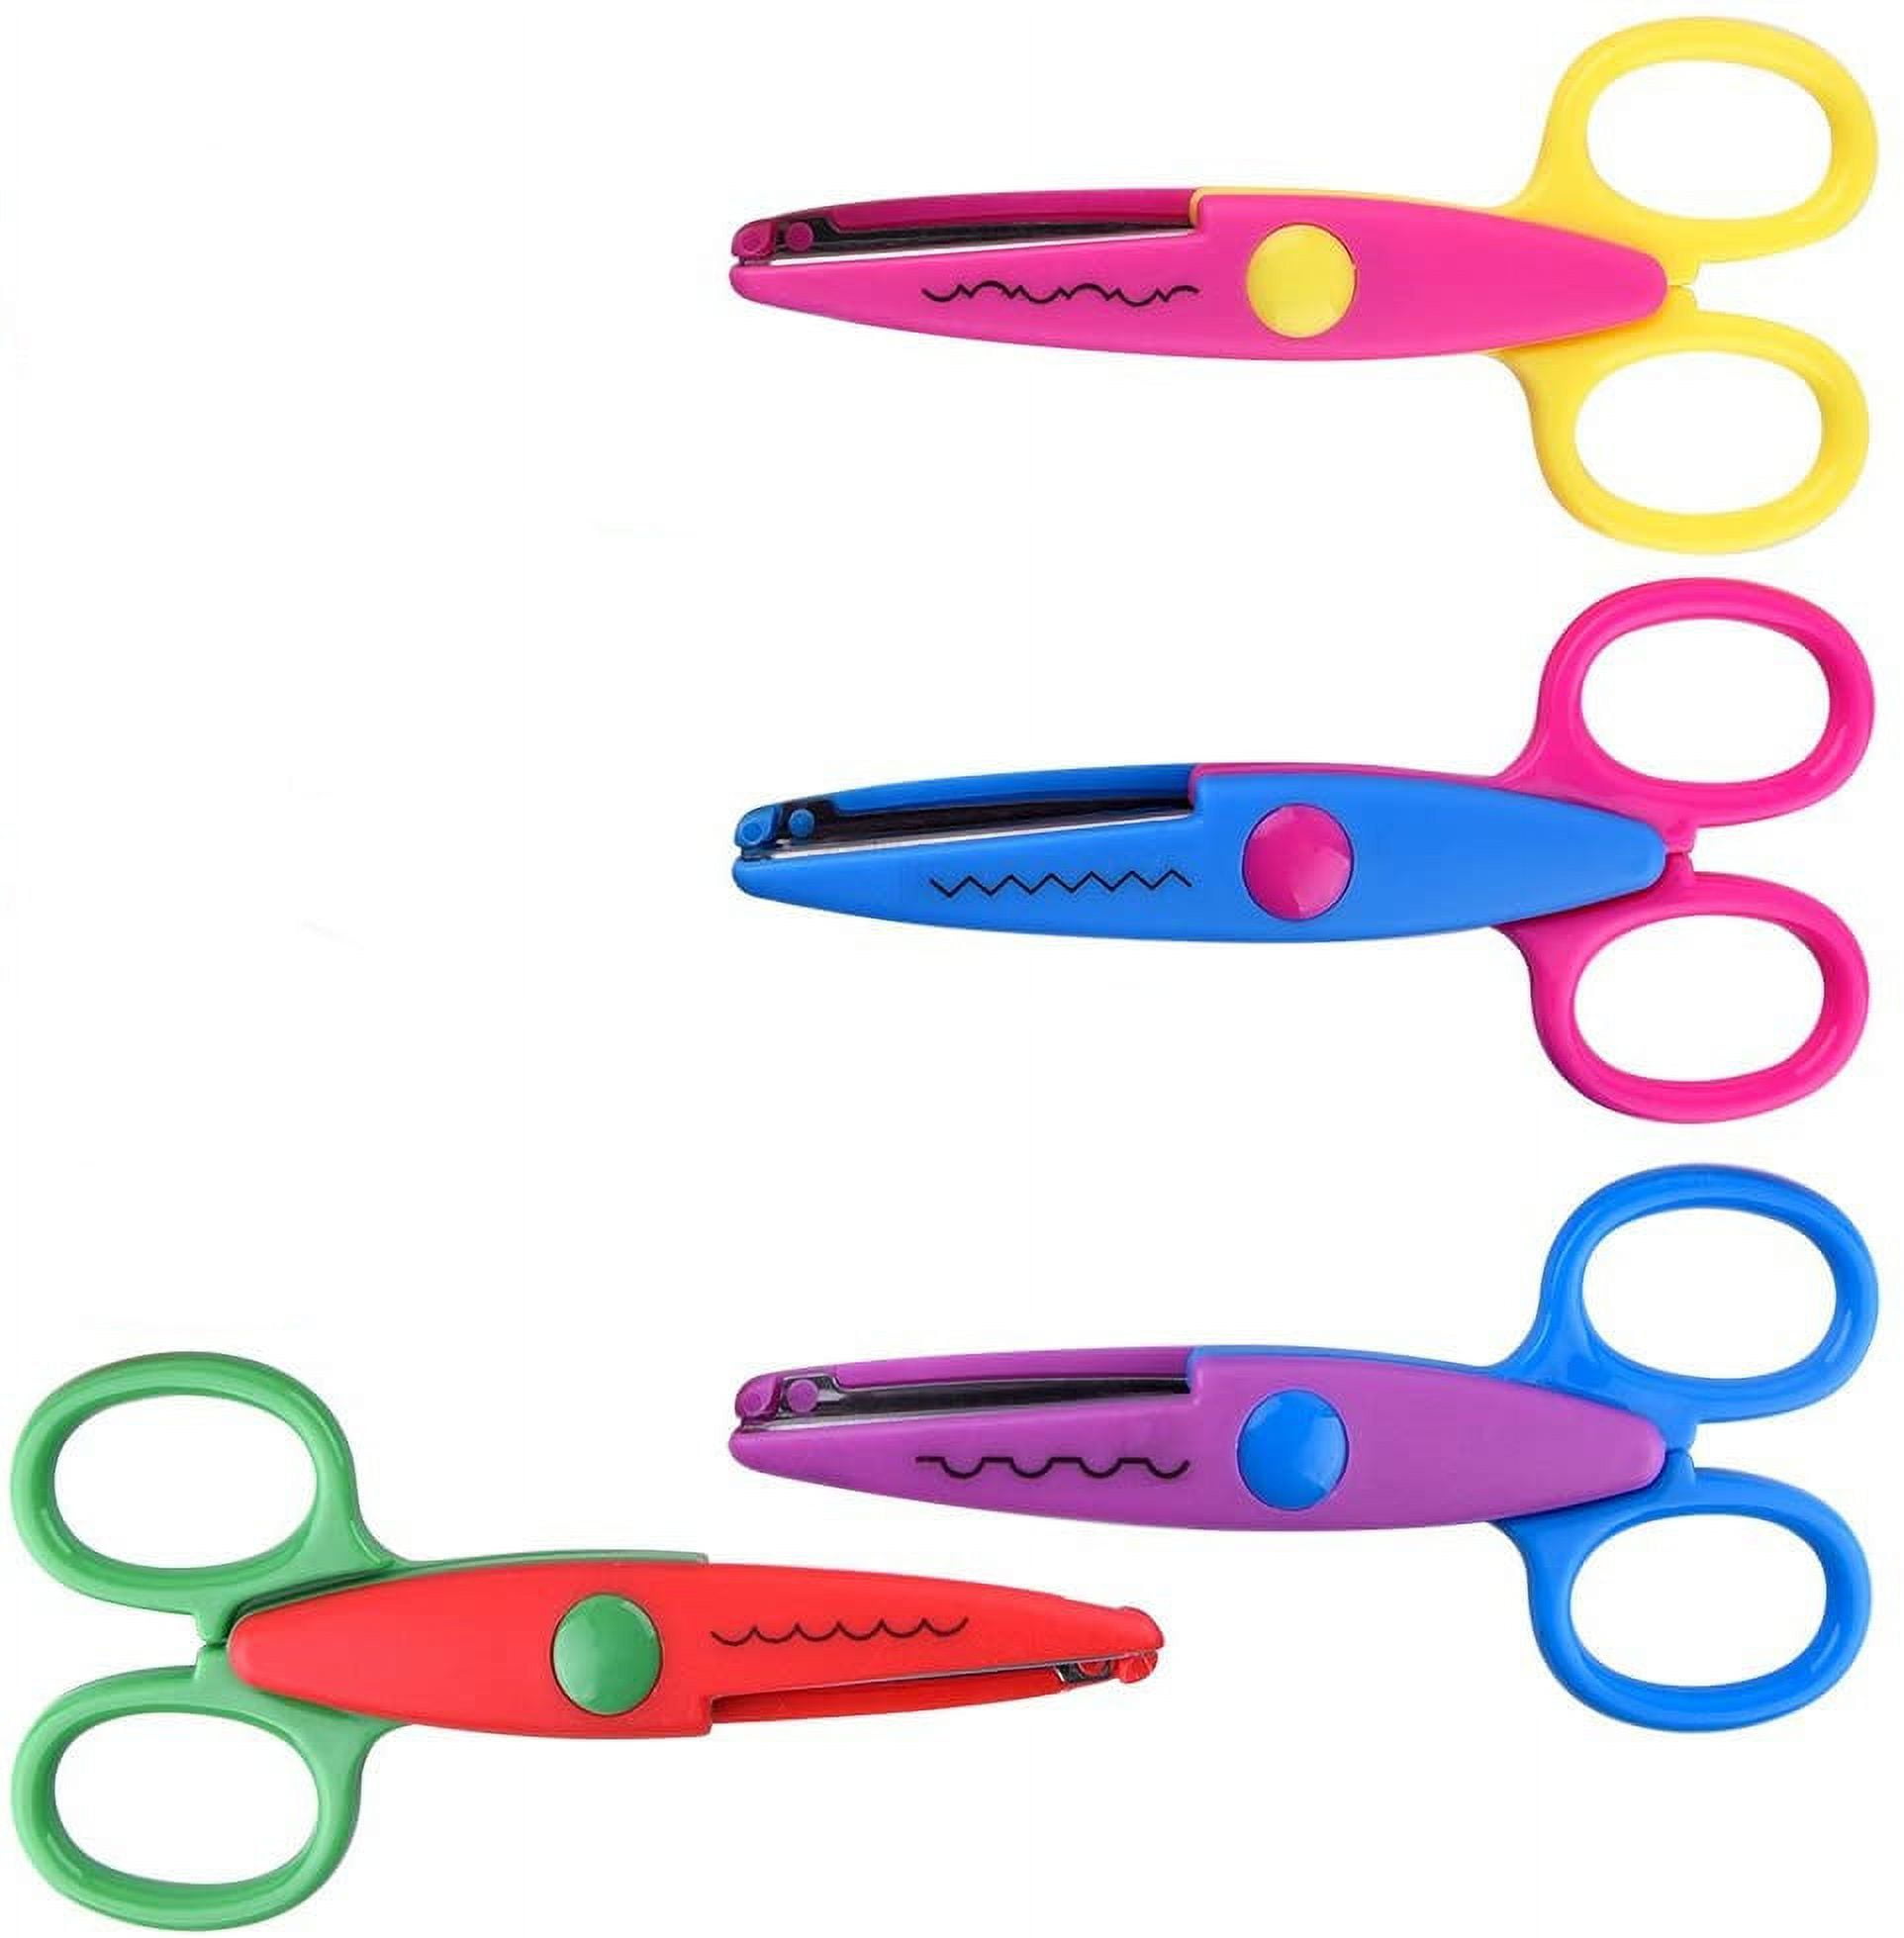 NOGIS Craft Scissors Decorative Edge, ABS Resin Scrapbook Scissors with 6  Pattern, Safe for Kids, Smoothly Cutting, Set of 6, Funny&Colorful 